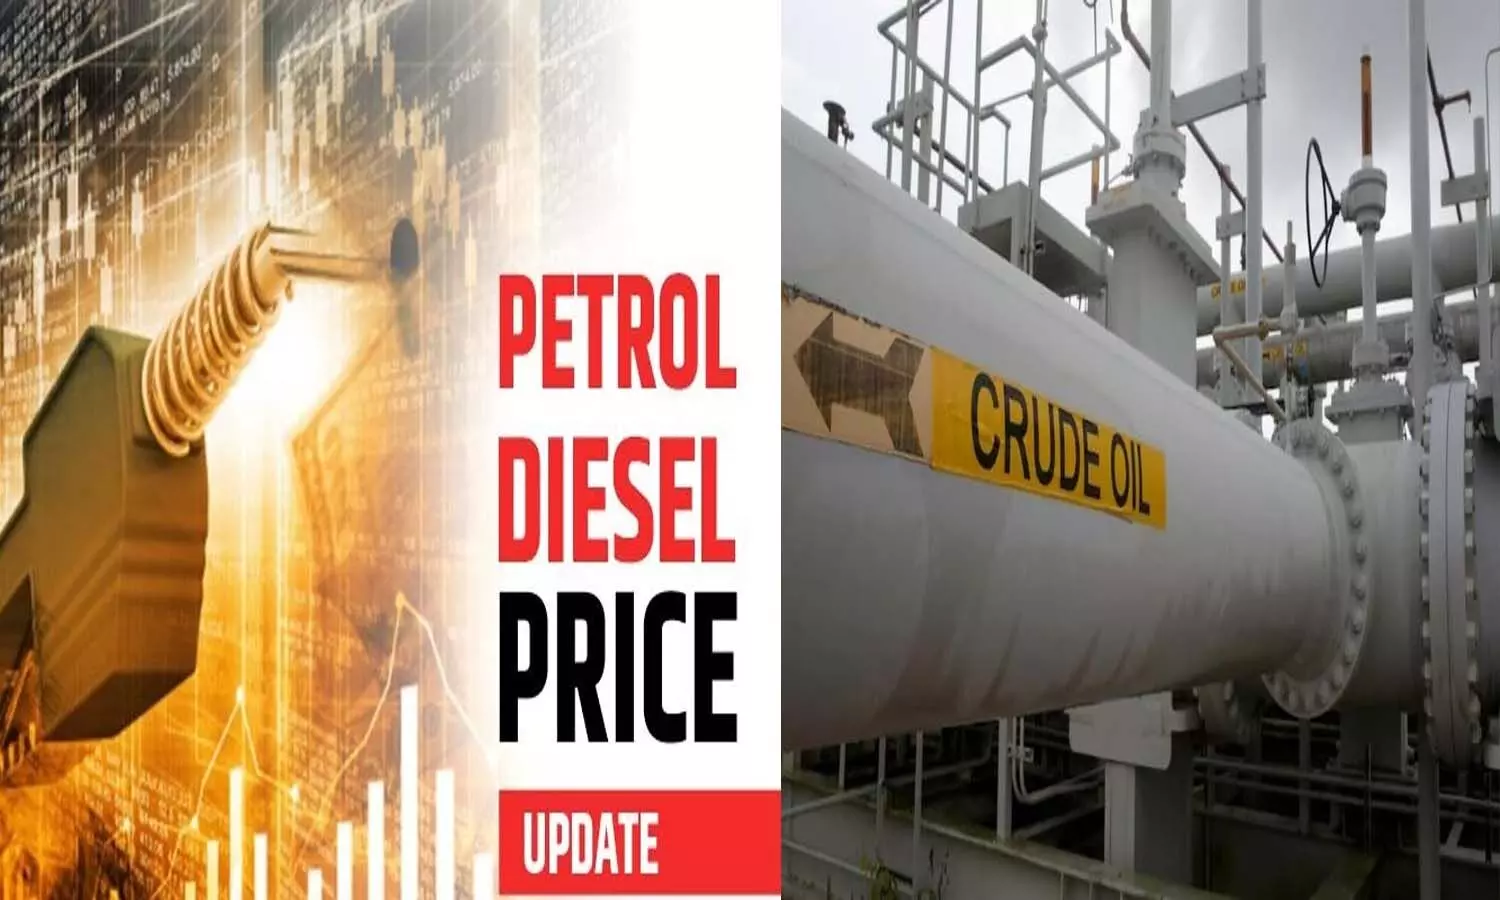 Crude oil prices reduced, know todays new rate of petrol and diesel